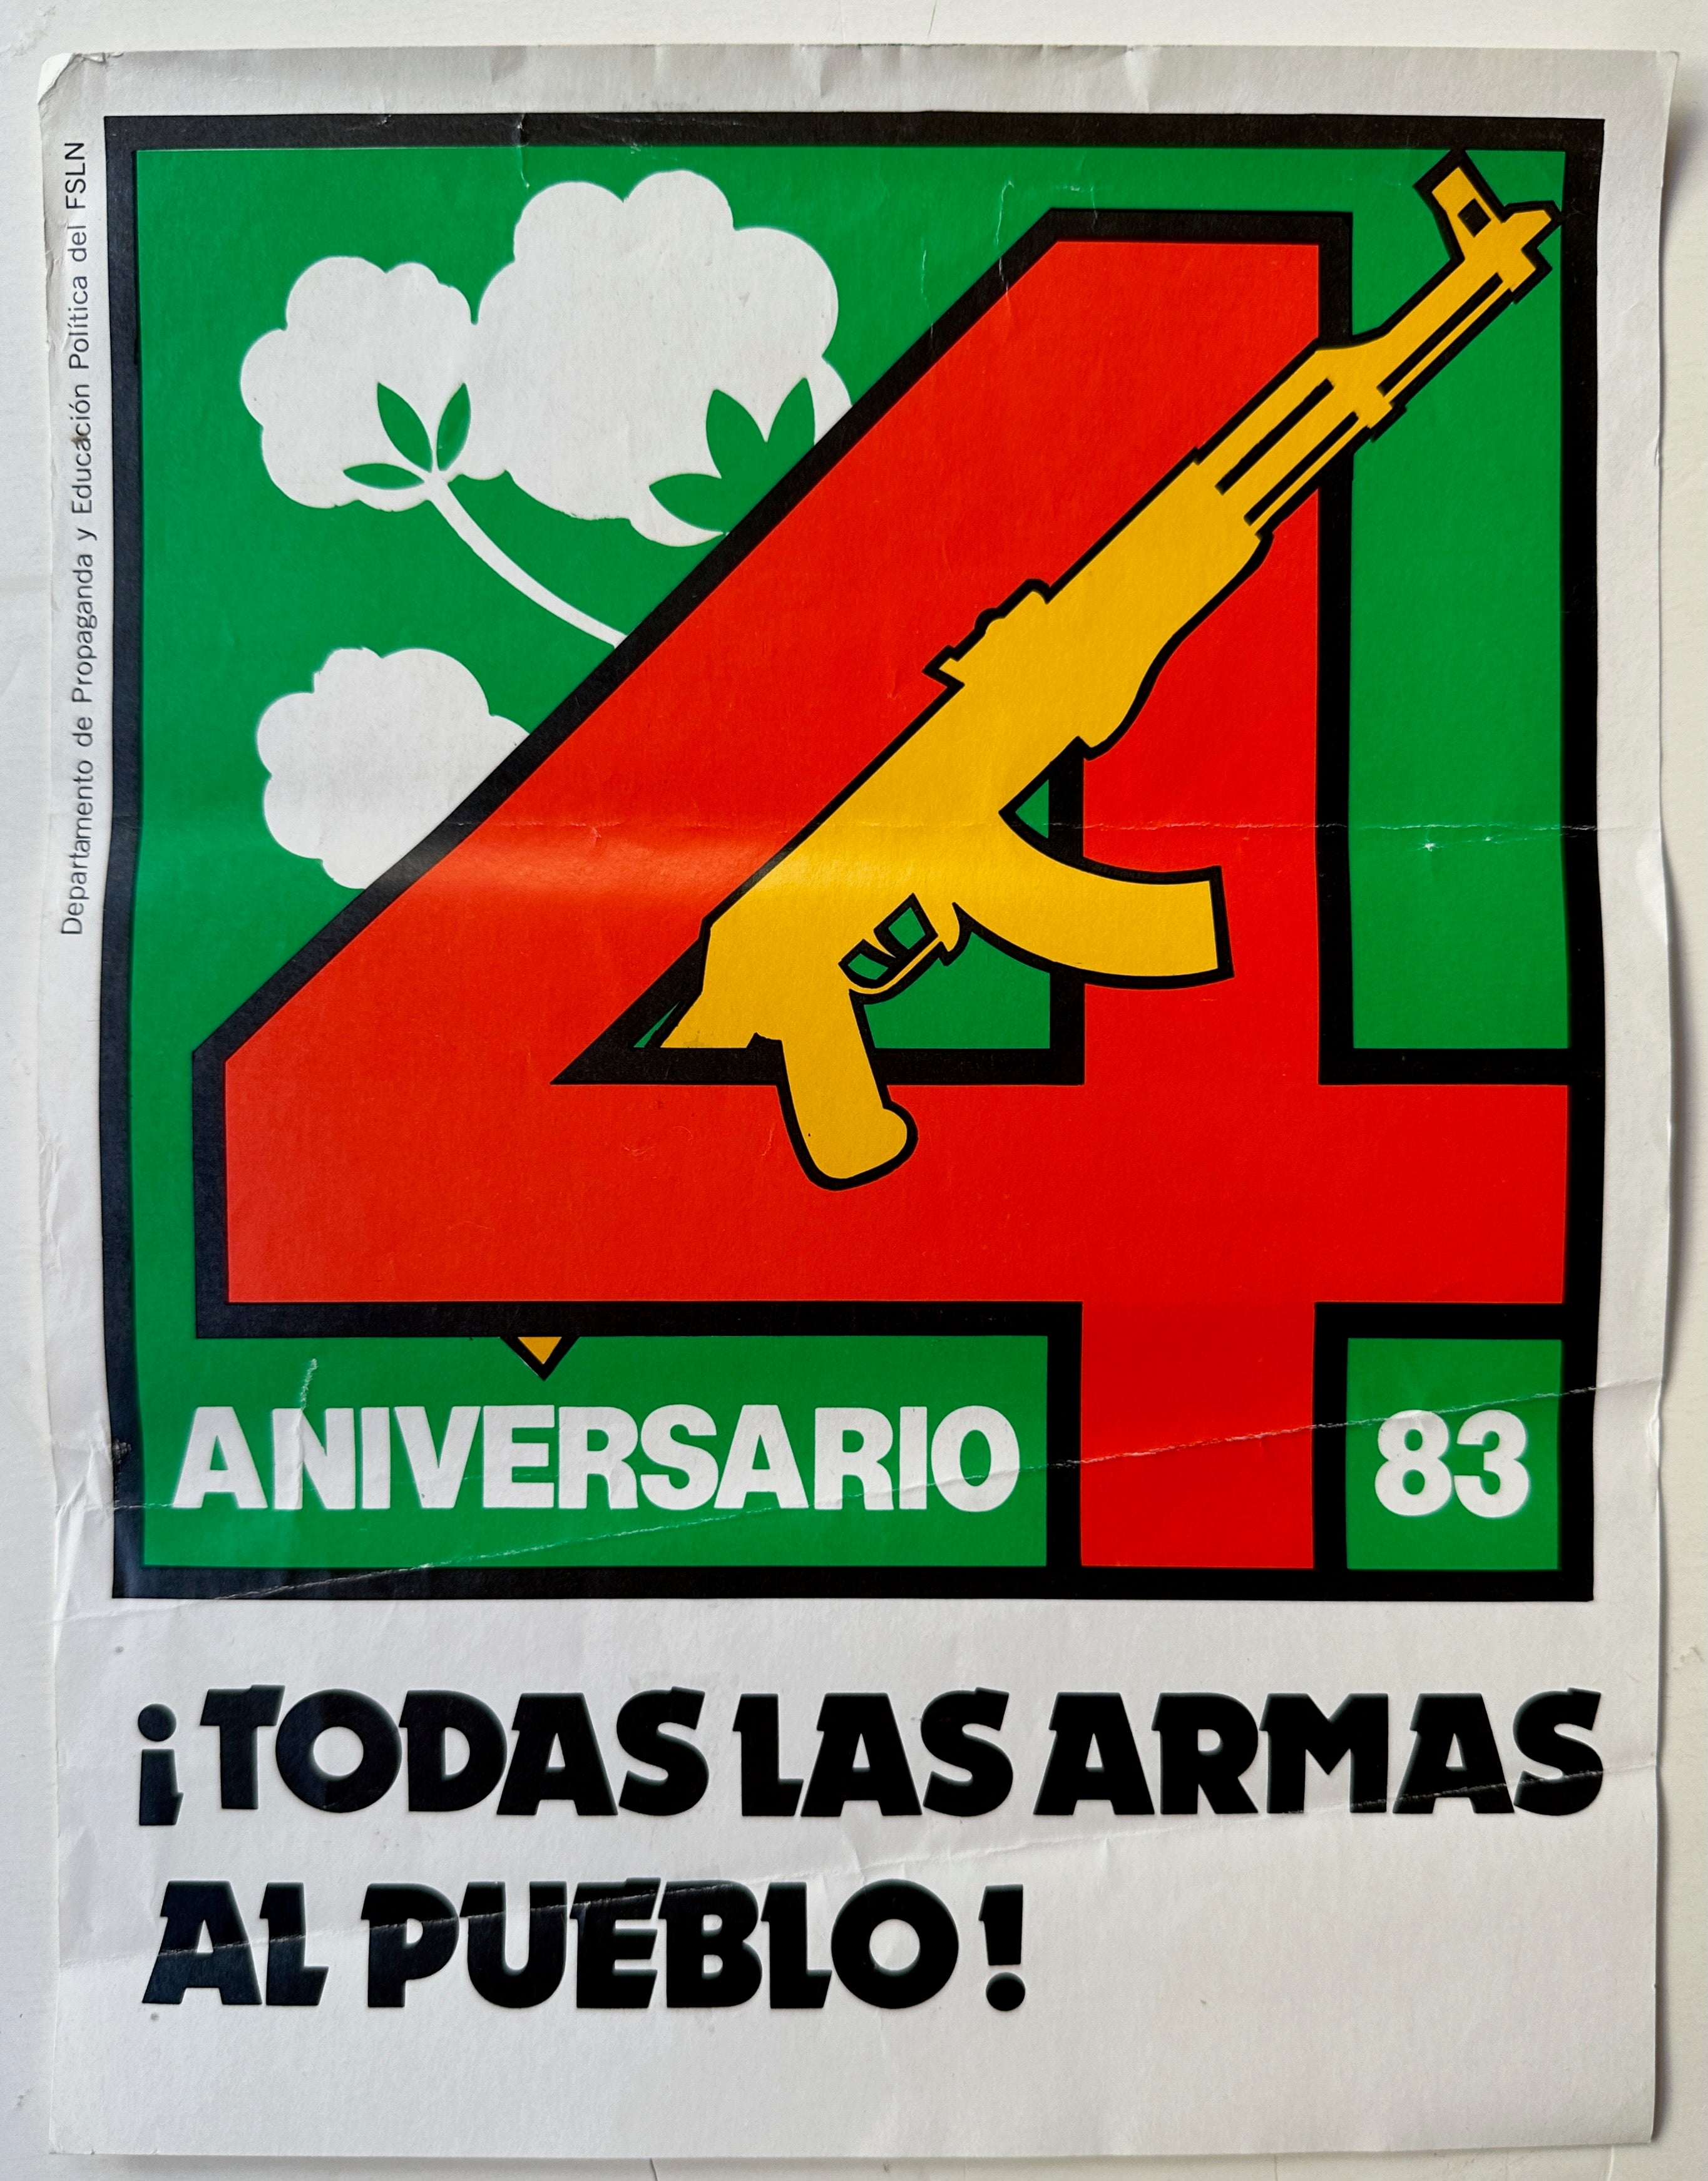 9x11 political poster of a 4 and a rifle sticking out of it against a green background